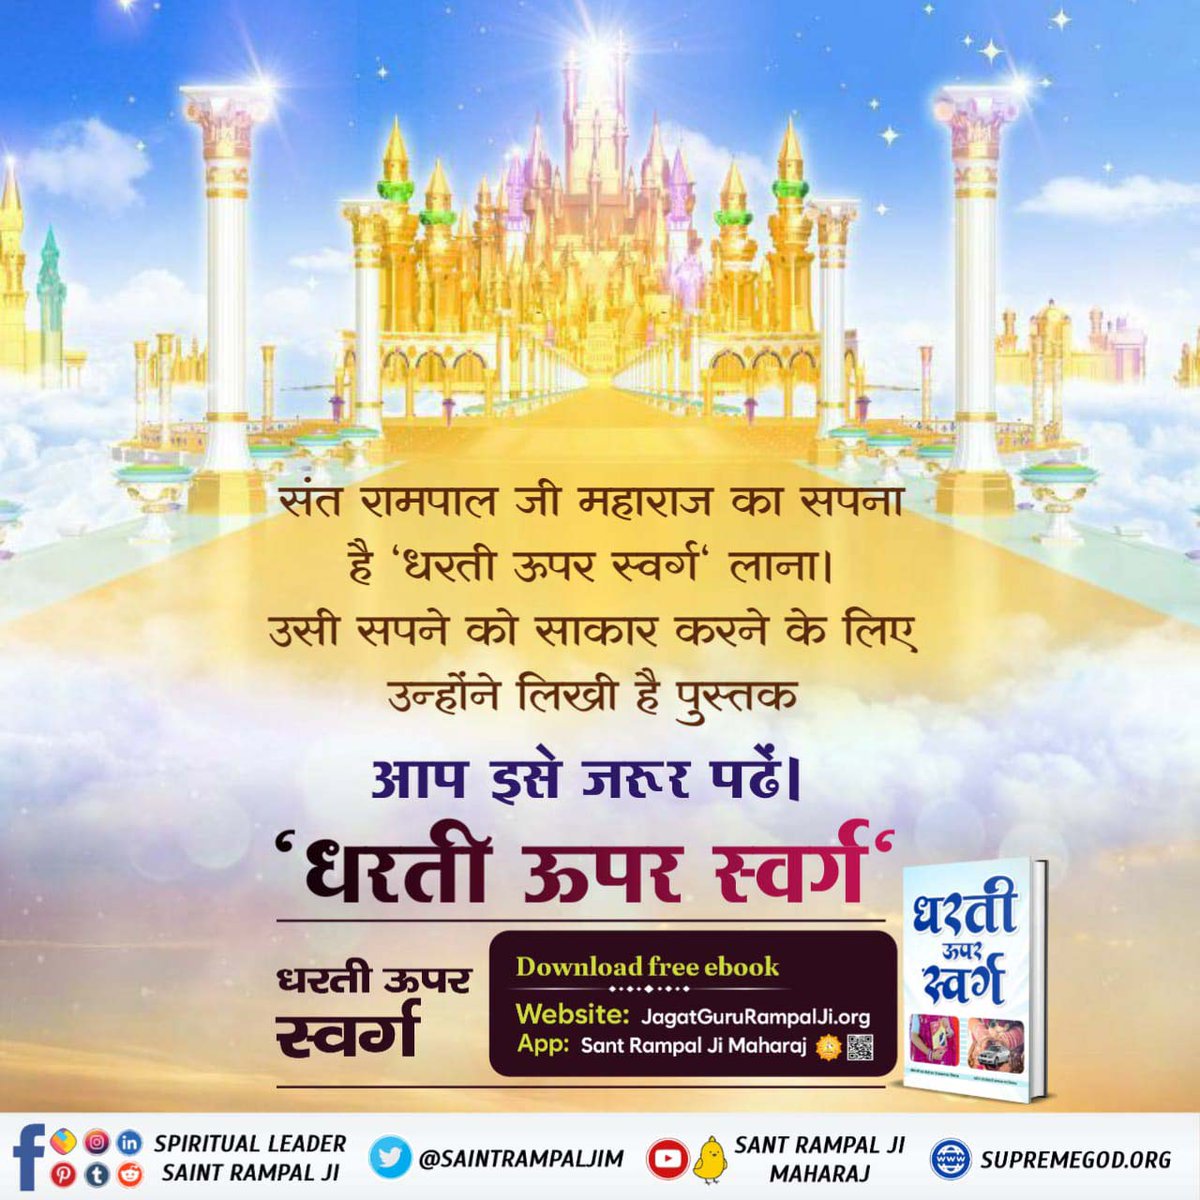 ##धरती_को_स्वर्ग_बनाना_है

Sant Rampal Ji Maharaj
After listening to the satsang words of Saint Rampal Ji Maharaj and joining him after receiving Naam Upadesh, all the sorrows of life will end. Through satsang, man comes to know the basic duty of life.
Man is free from all vices